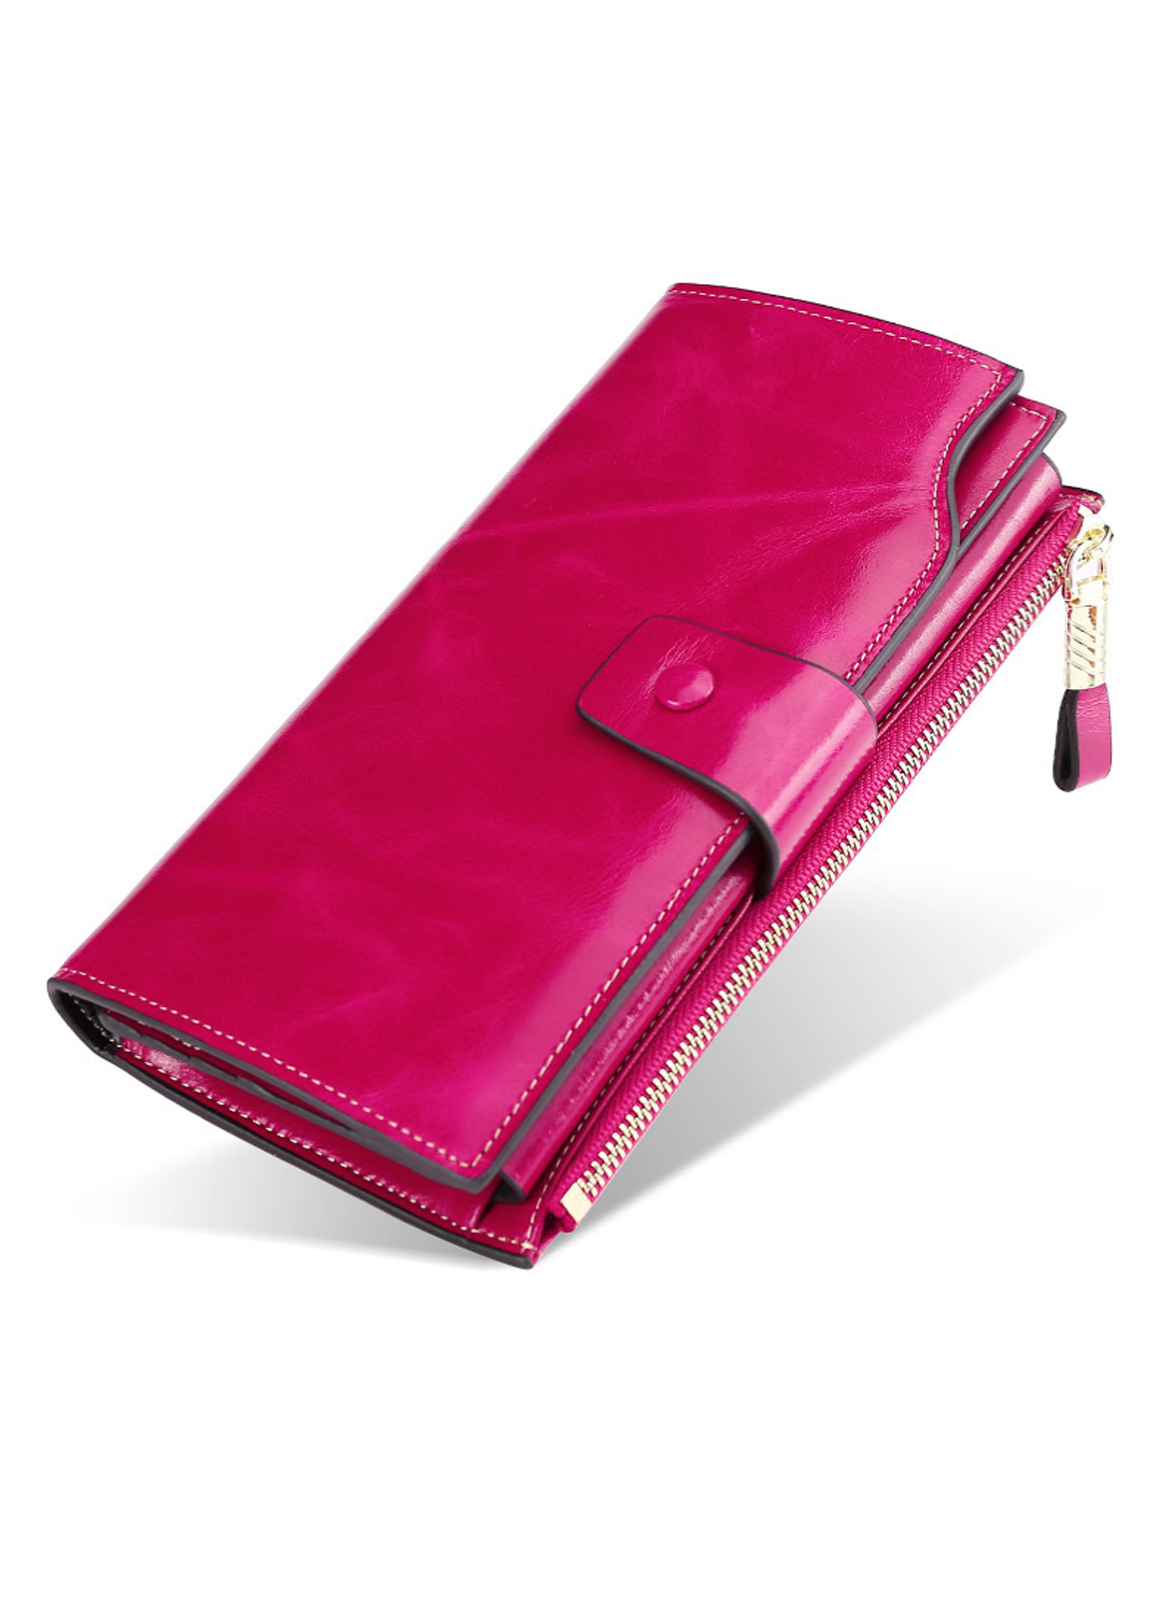 Genuine Soft Leather Wallet Button Rose Red Large - Tamboril